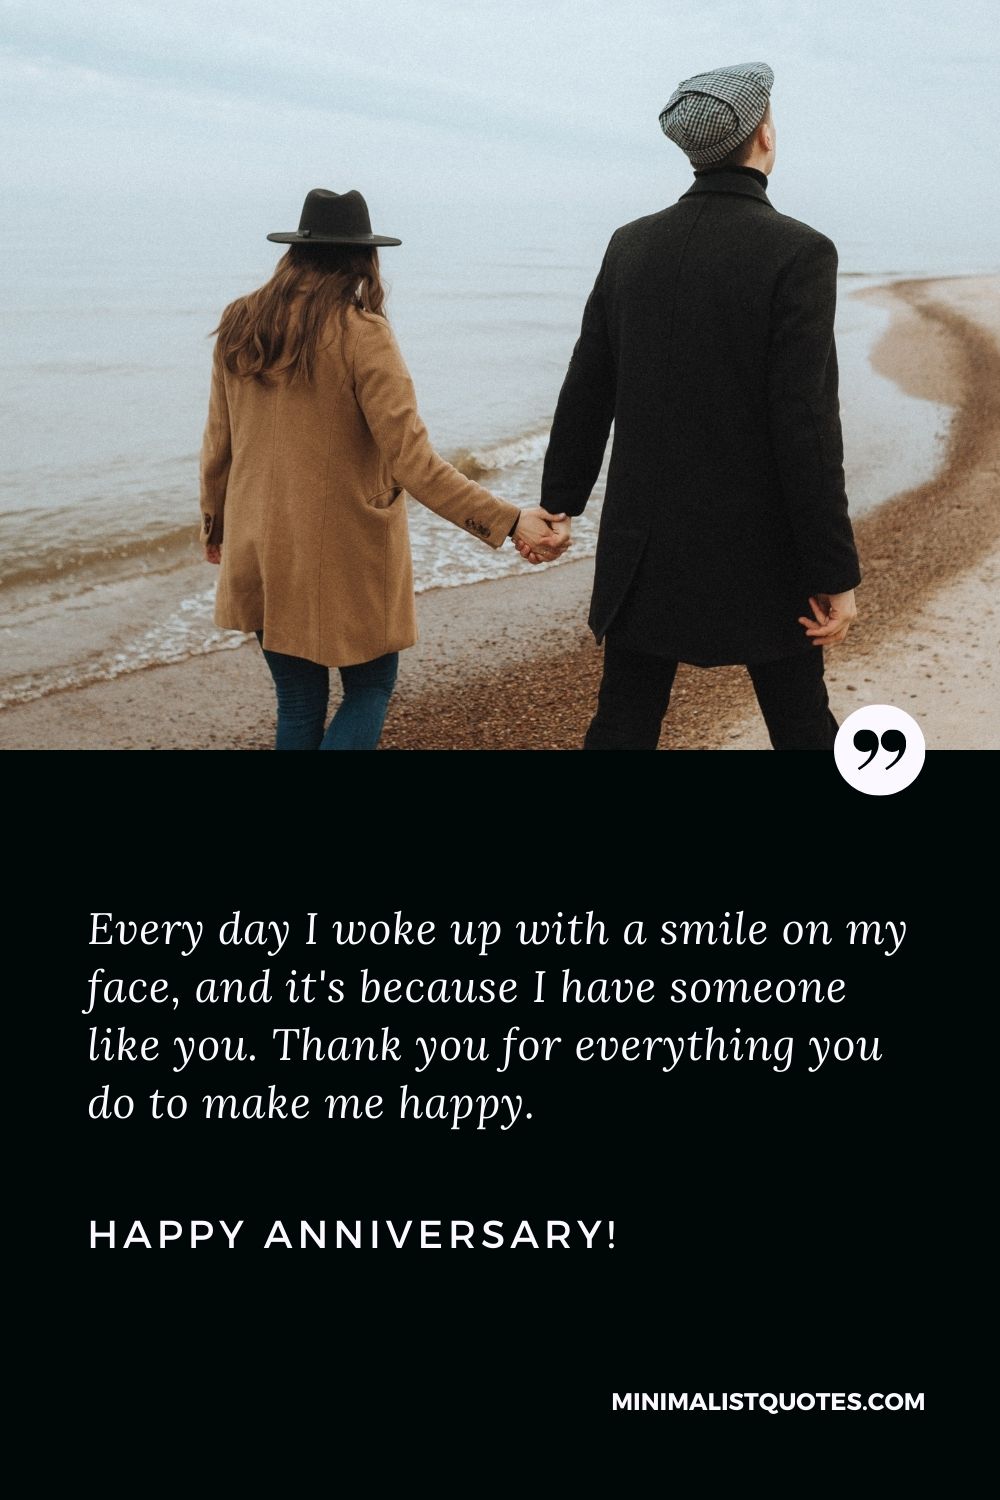 Happy anniversary quotes for husband: Every day I woke up with a smile on my face, and it's because I have someone like you. Thank you for everything you do to make me happy. Happy Anniversary!